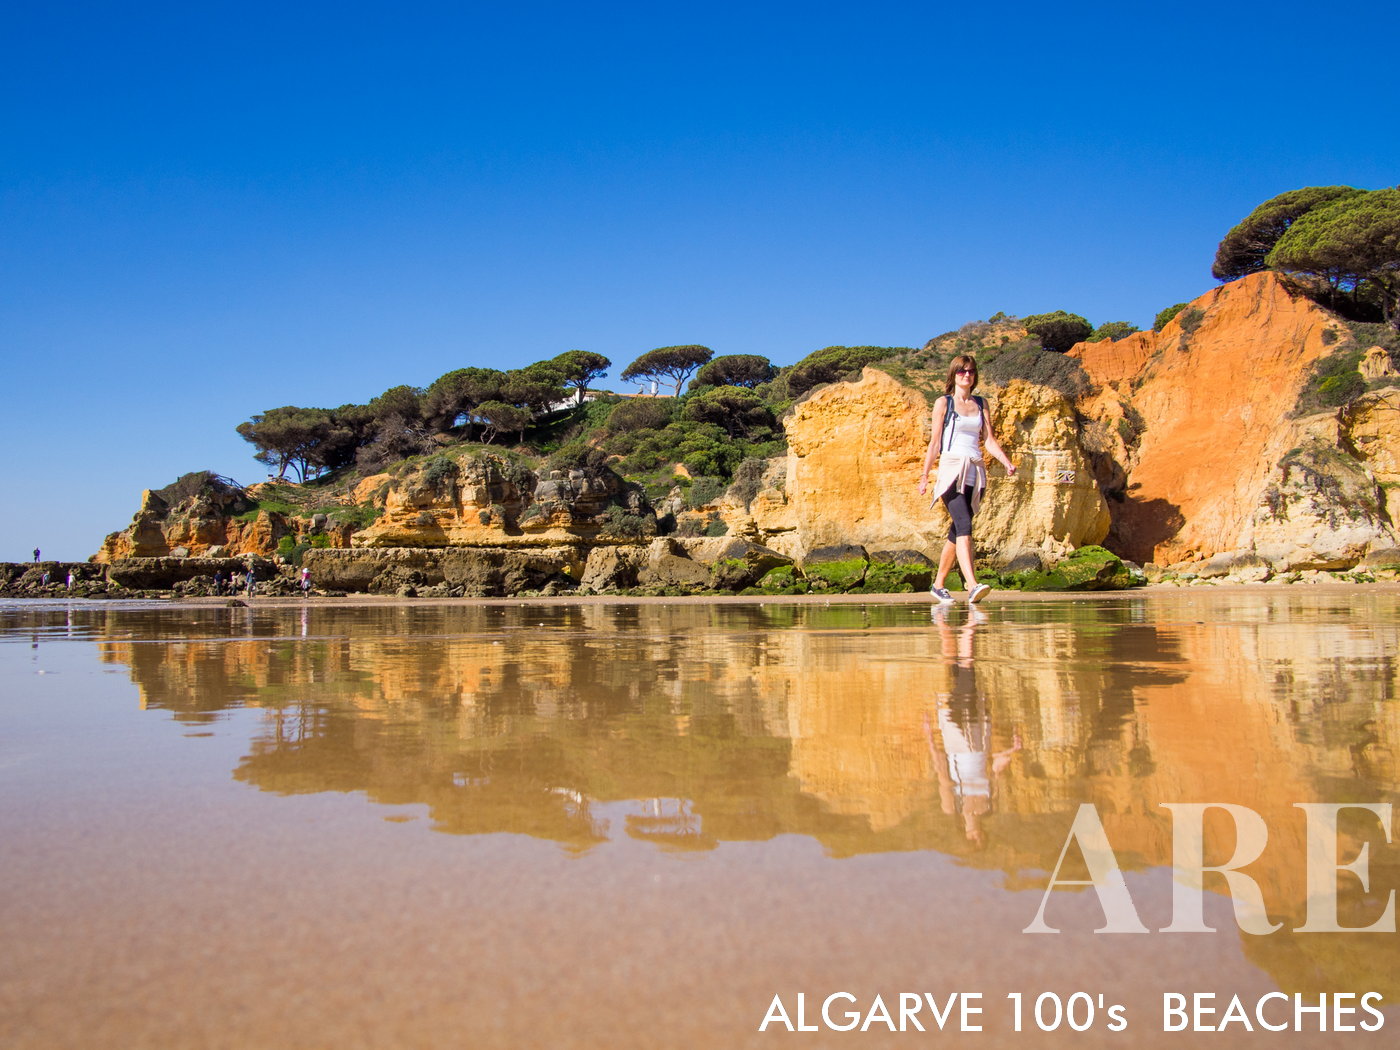 Along Olhos de Água beach, you will find footpaths along the beach during low tide, and small paths over the cliff